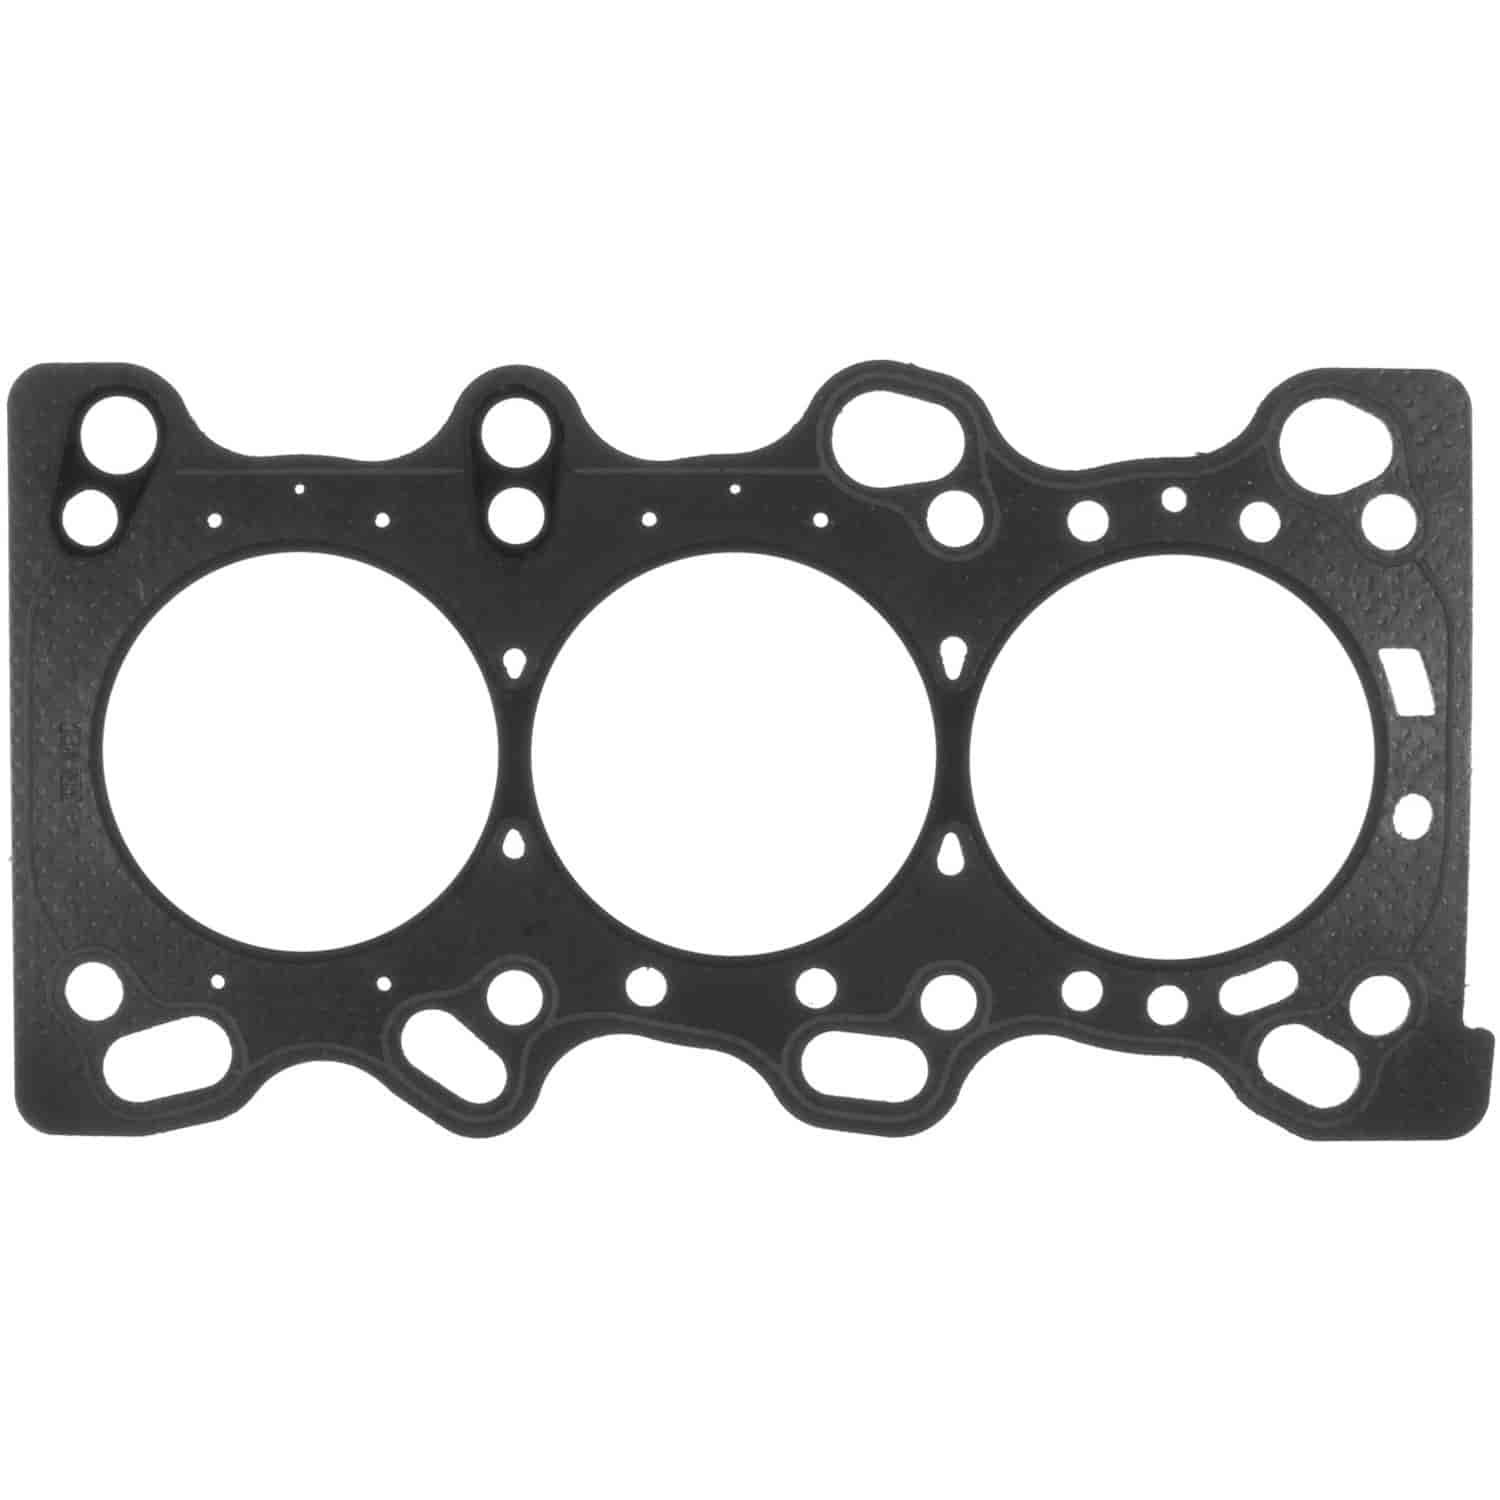 Cylinder Head Gasket Right Acura Legend w/3206cc C32A1 V6 Eng. 91-94 right